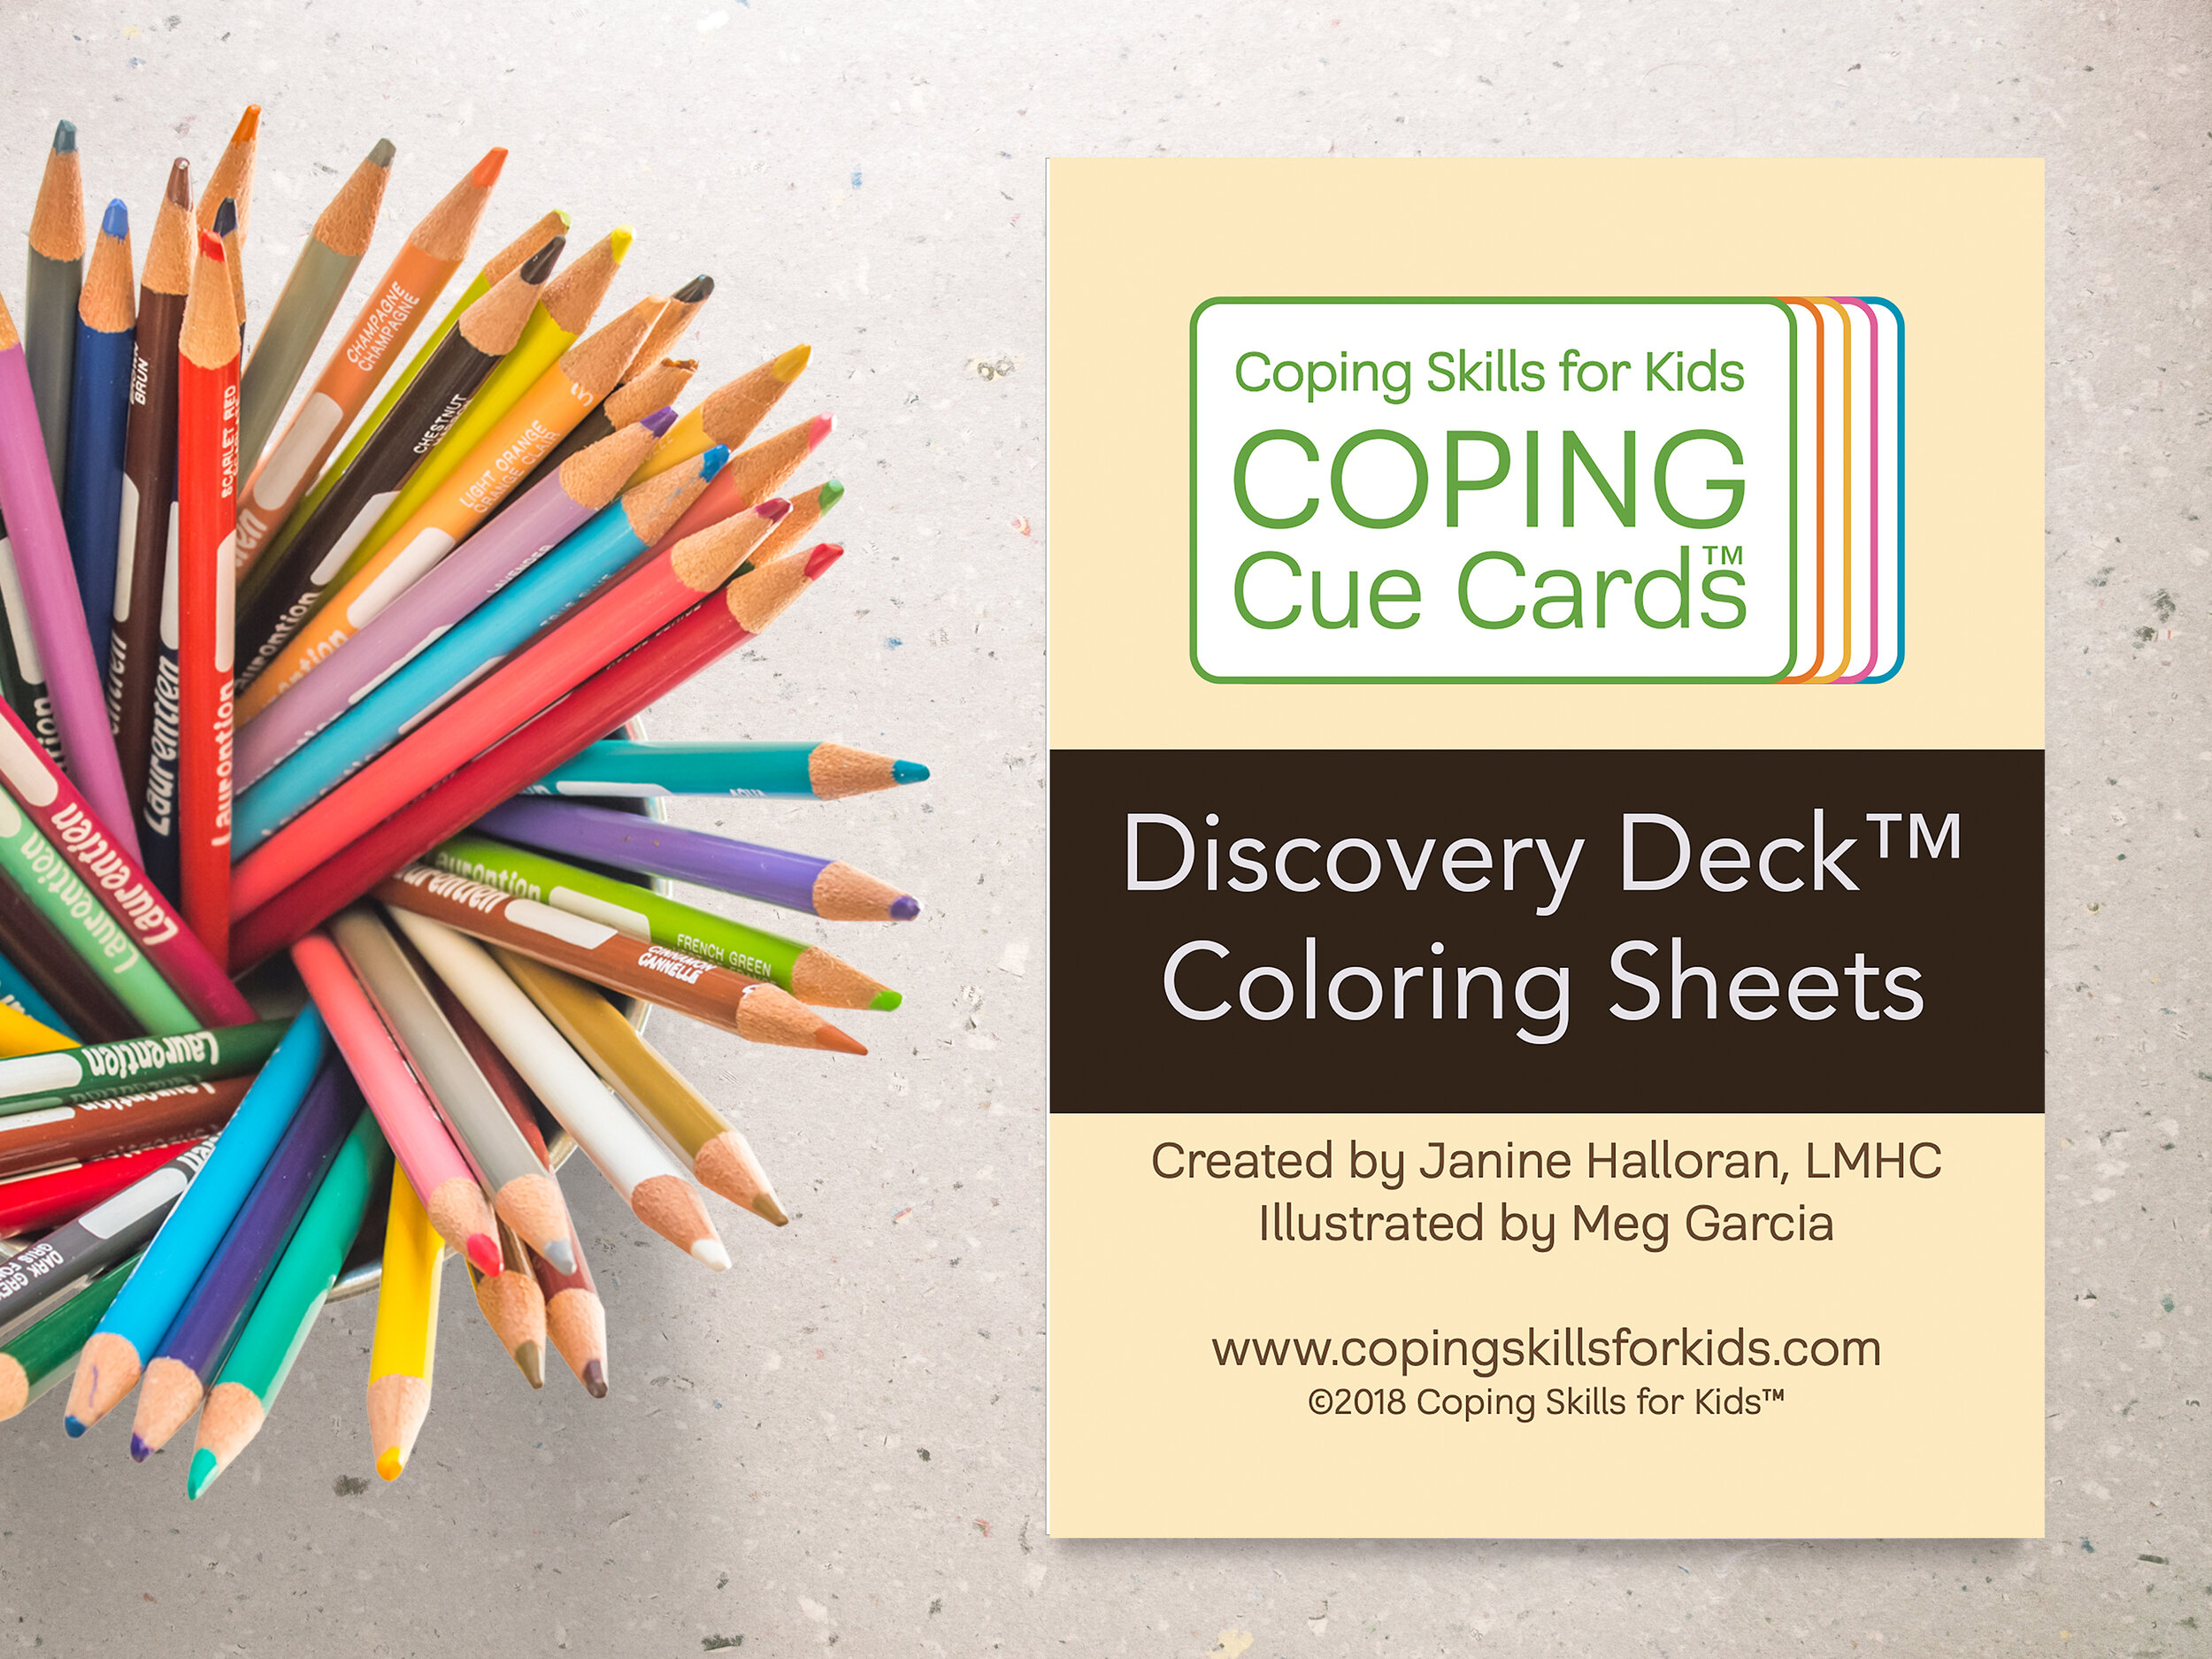 Discovery Deck Coloring Sheets Mock Up.jpg